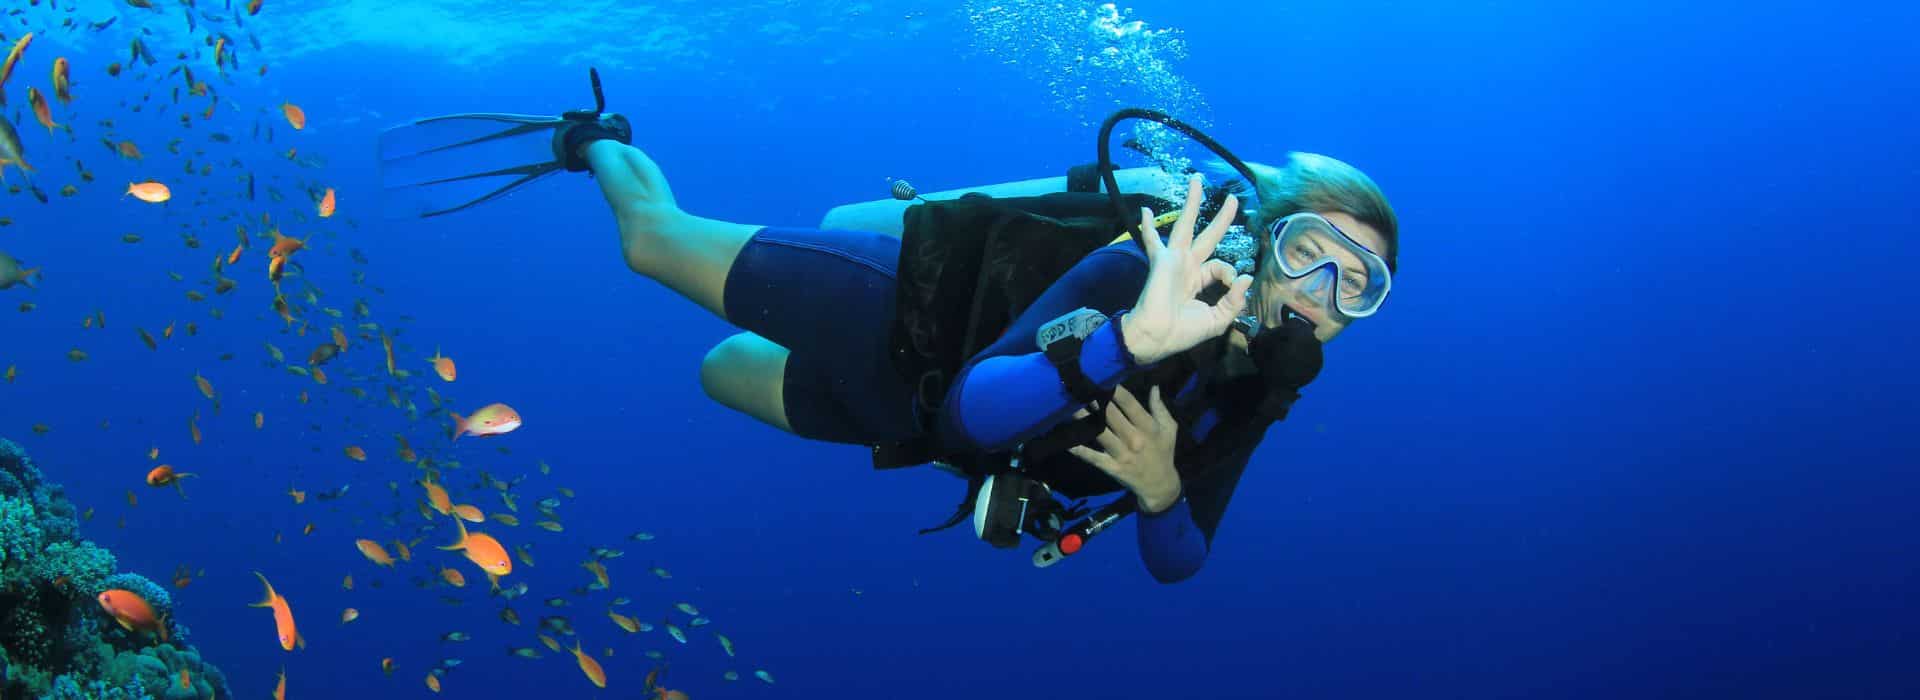 A female scuba diver is giving the “ok” signal